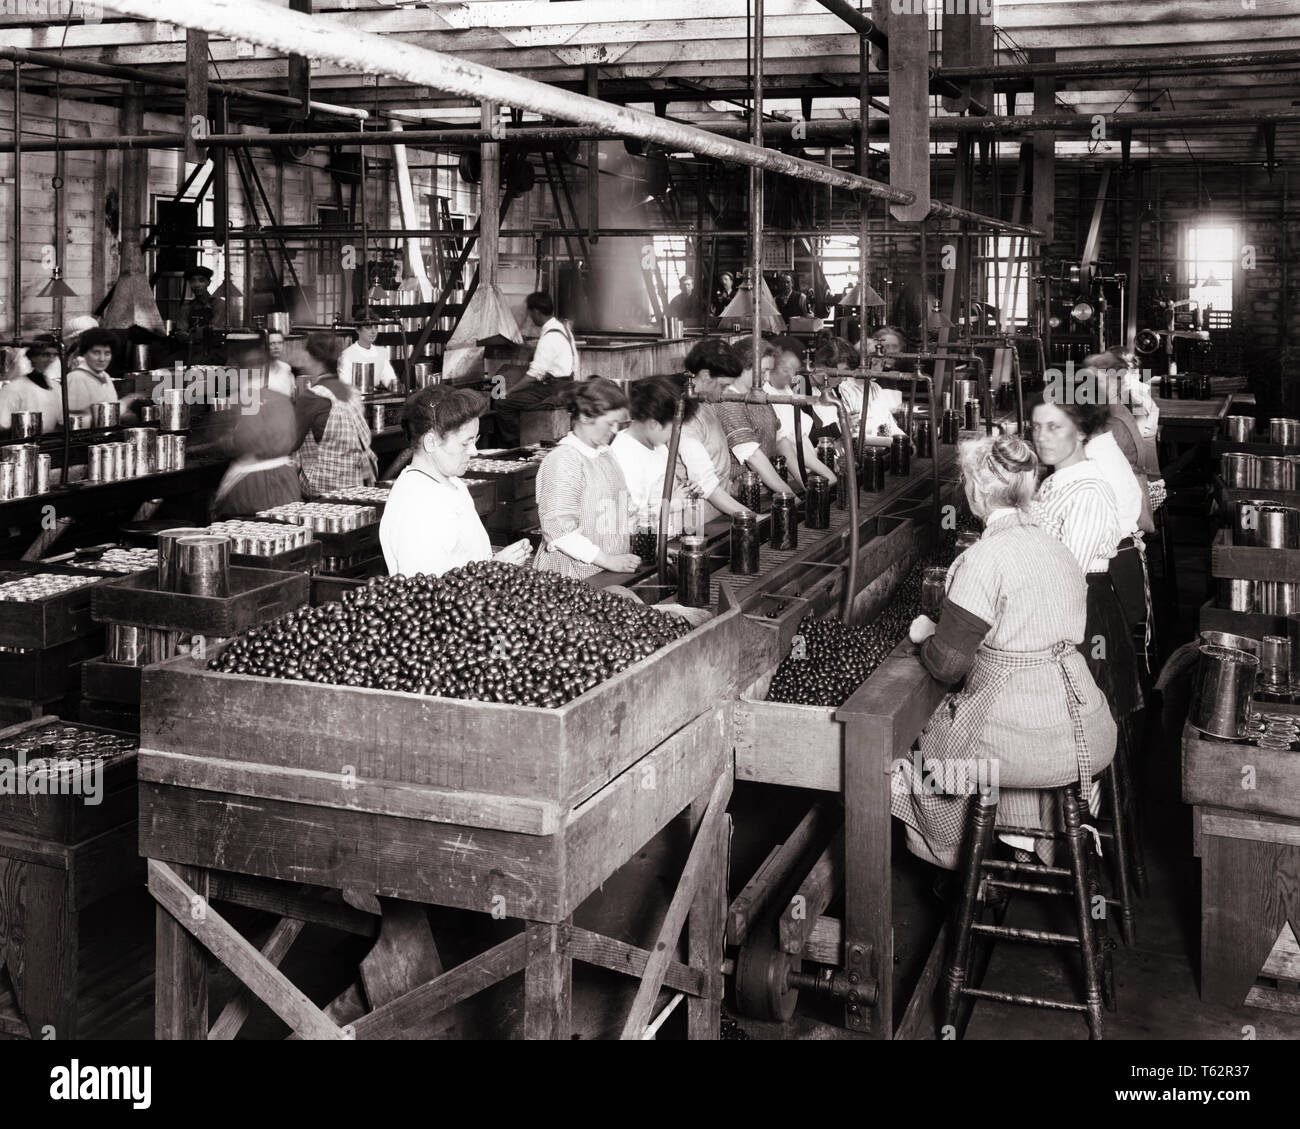 1900s FOOD PROCESSING FACTORY PRIMARILY STAFF OF WOMEN FILLING JARS WITH OLIVES CALIFORNIA USA - asp p6428 ASP001 HARS B&W PROCESSING SKILL OCCUPATION OLIVES SKILLS FILLING LABOR OF EMPLOYMENT OCCUPATIONS MOTION BLUR CONCEPTUAL EMPLOYEE COOPERATION GLASS JARS JARS MID-ADULT MID-ADULT MAN MID-ADULT WOMAN STAFF BLACK AND WHITE CAUCASIAN ETHNICITY LABORING OLD FASHIONED Stock Photo